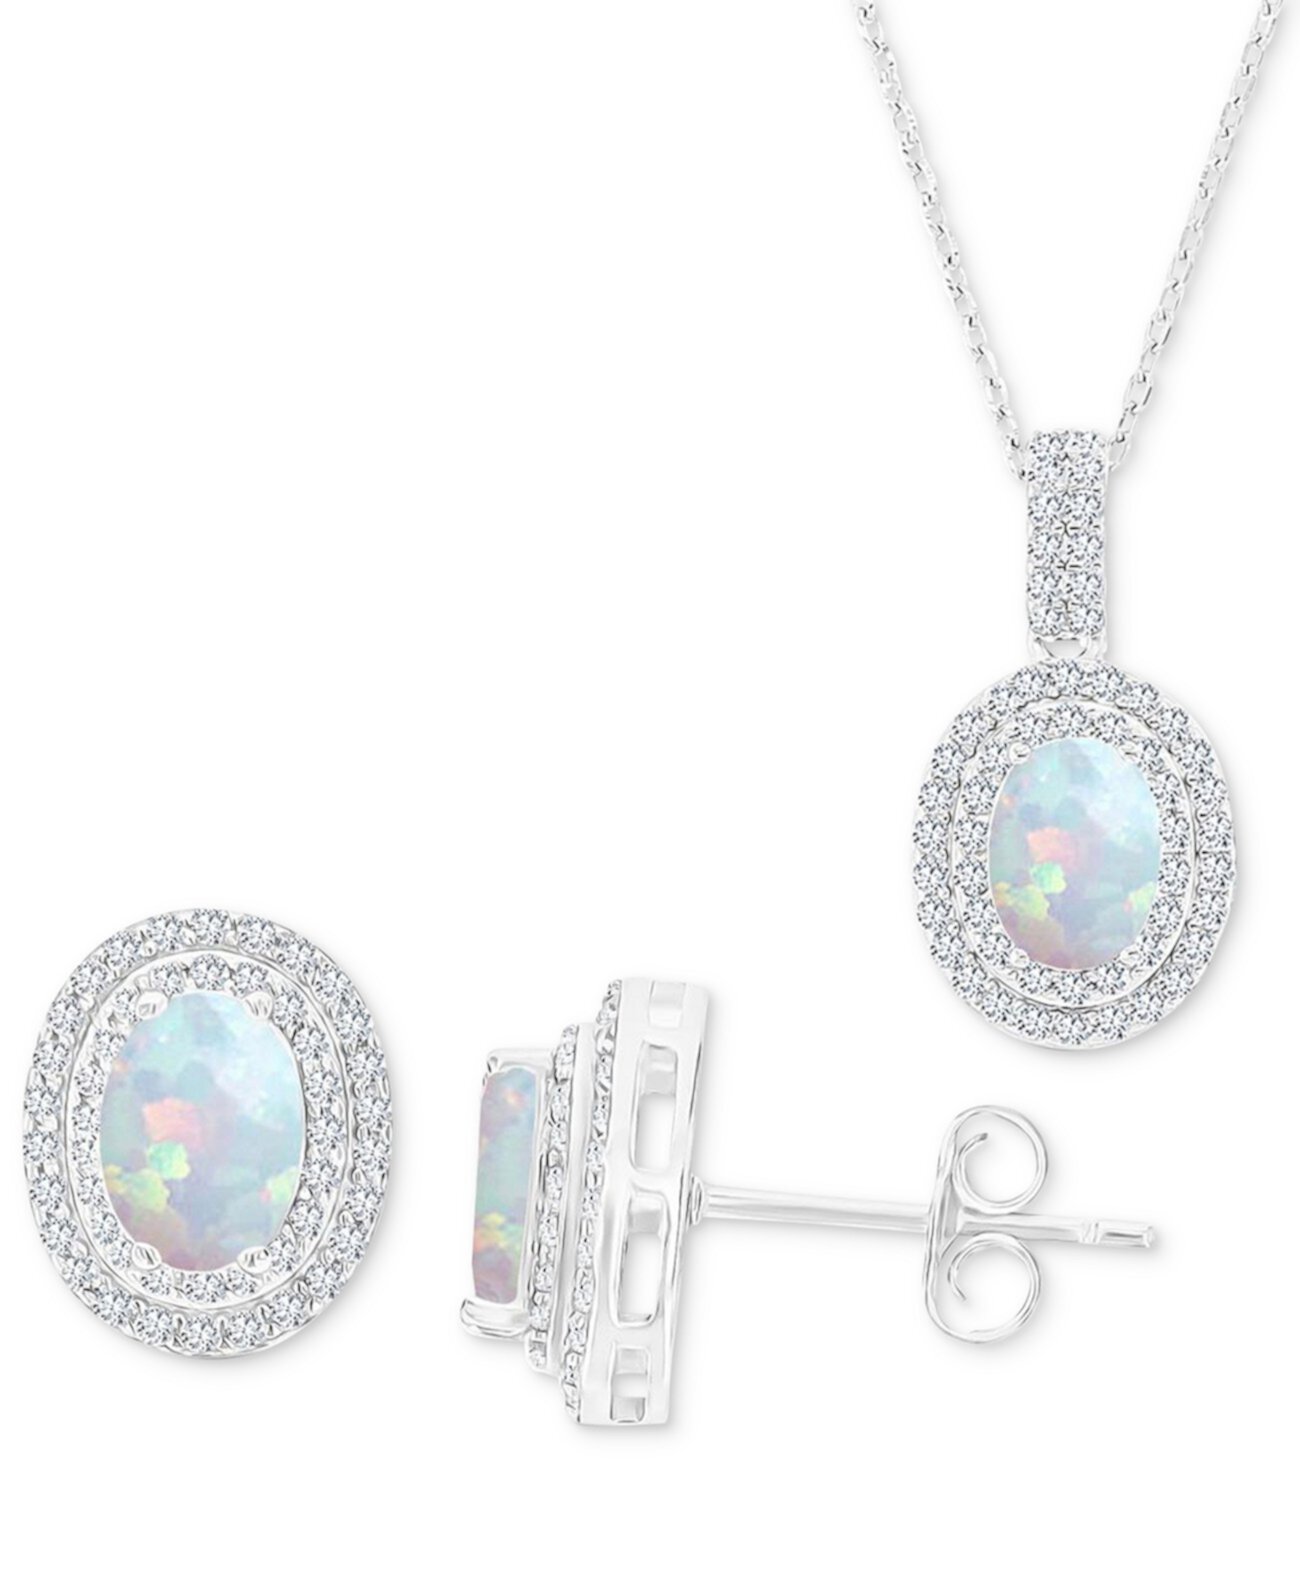 2-Pc. Set Lab-Grown Opal (1-1/6 ct. t.w.) & Lab-Grown White Sapphire (1 ct. t.w.) Oval Halo Pendant Necklace & Matching Stud Earrings in Sterling Silver Macy's